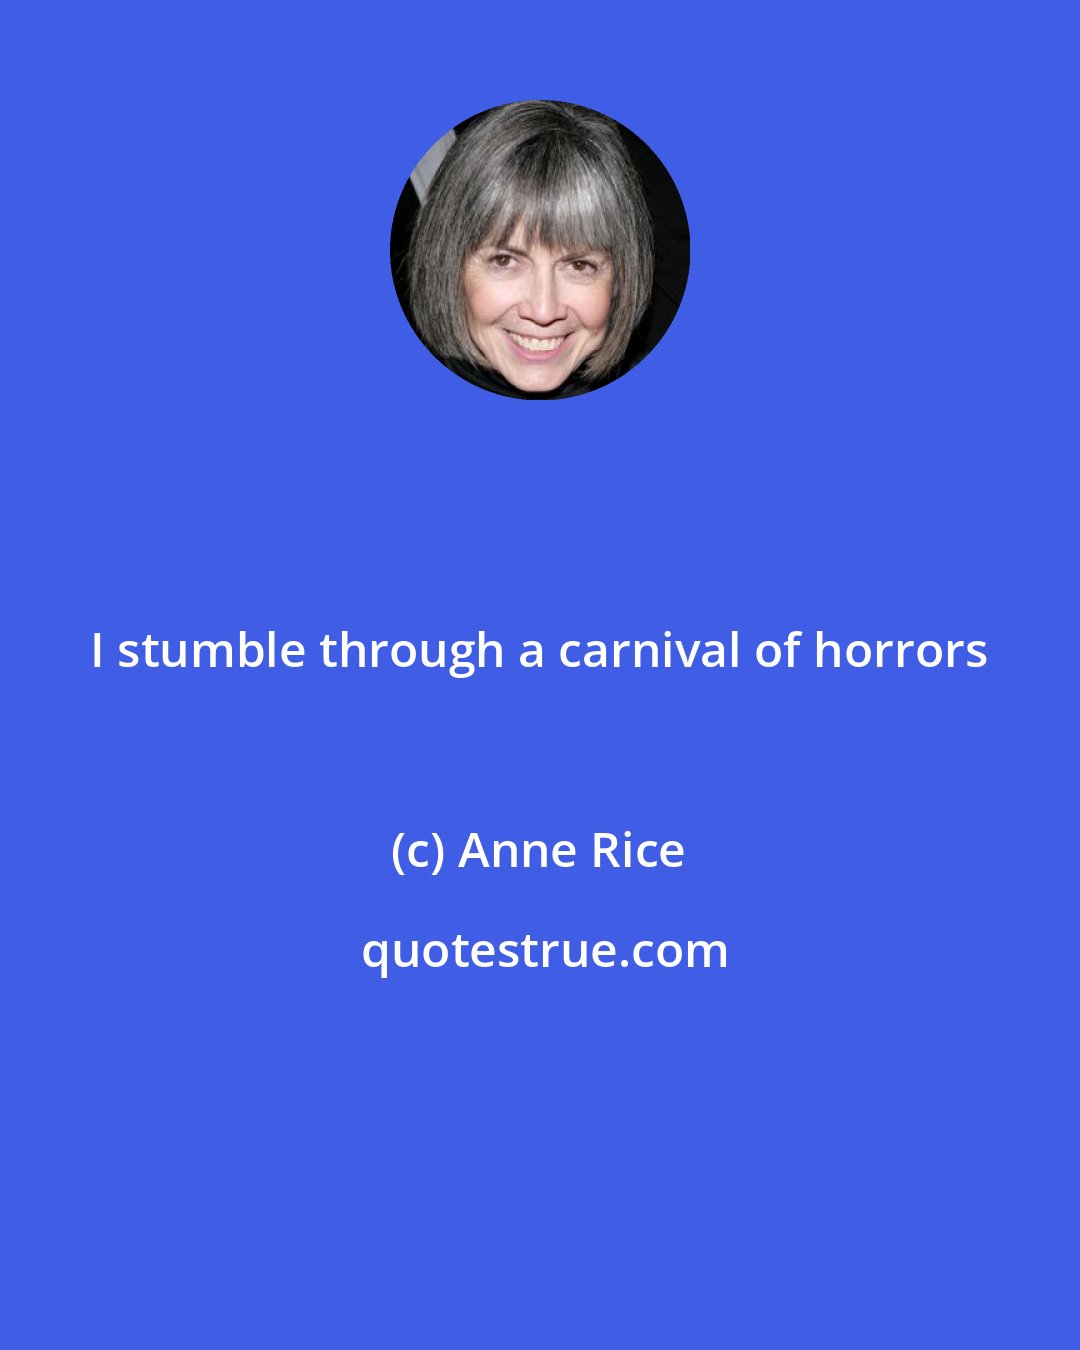 Anne Rice: I stumble through a carnival of horrors